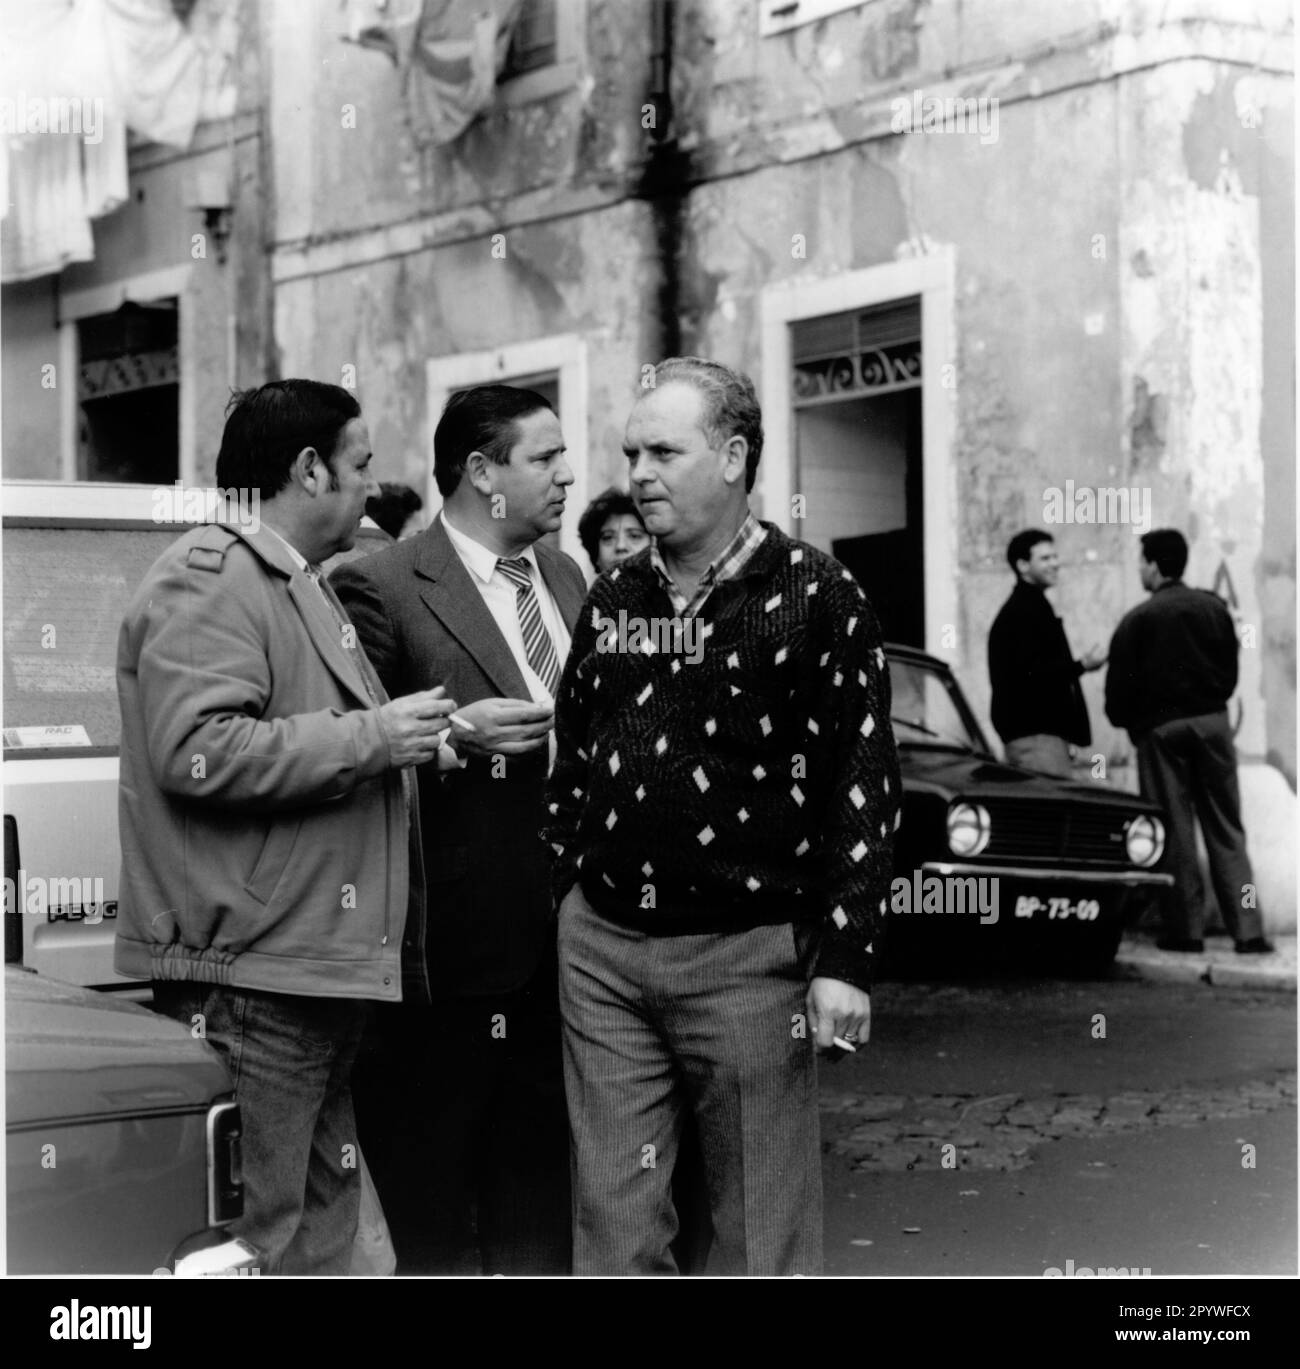 Portugal, Lisbon (Lisboa). Men with cigarettes in hand talking on the street, in front of a building. Street scene, black and white, 6x6 cm negative. Photo, 1992. Stock Photo